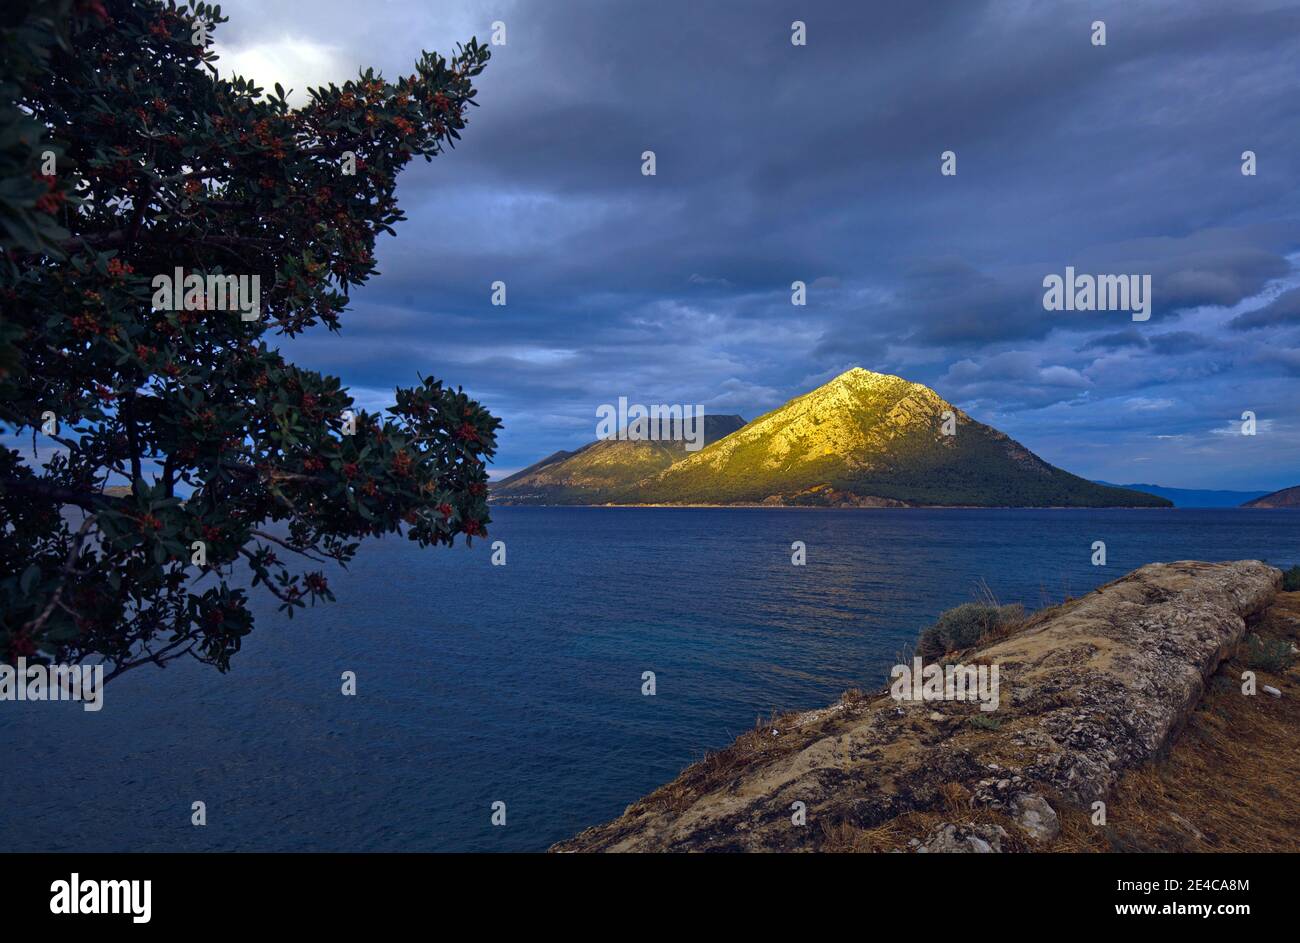 View of Kalamos Island in the days after the Medicane storm in September 2020 Stock Photo